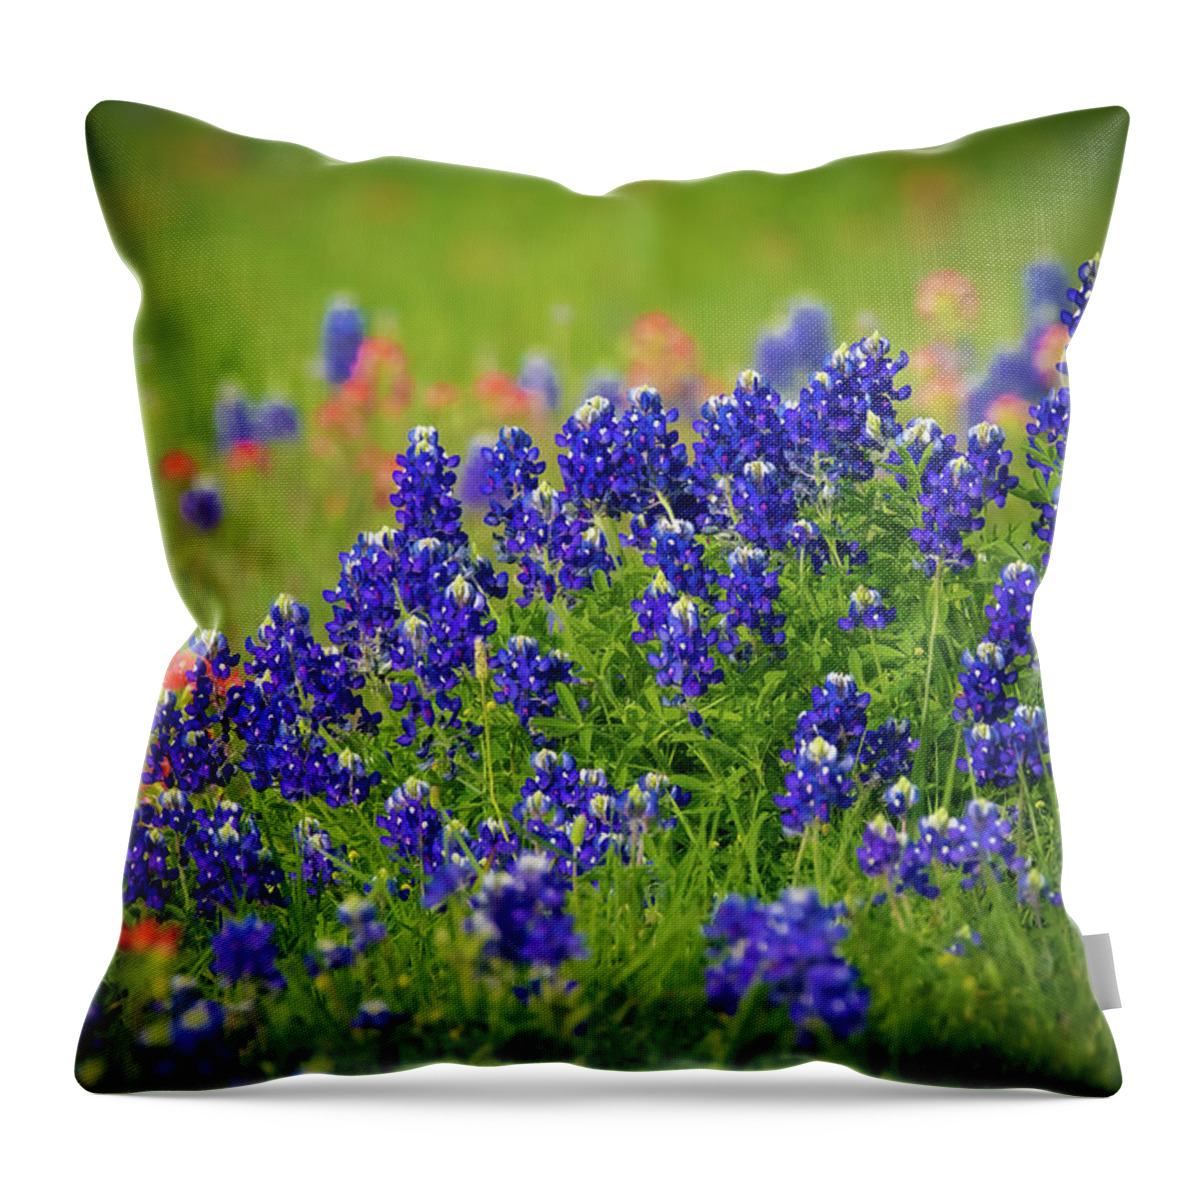 Bluebonnets Throw Pillow featuring the photograph Texas Wildflowers by Pam Rendall